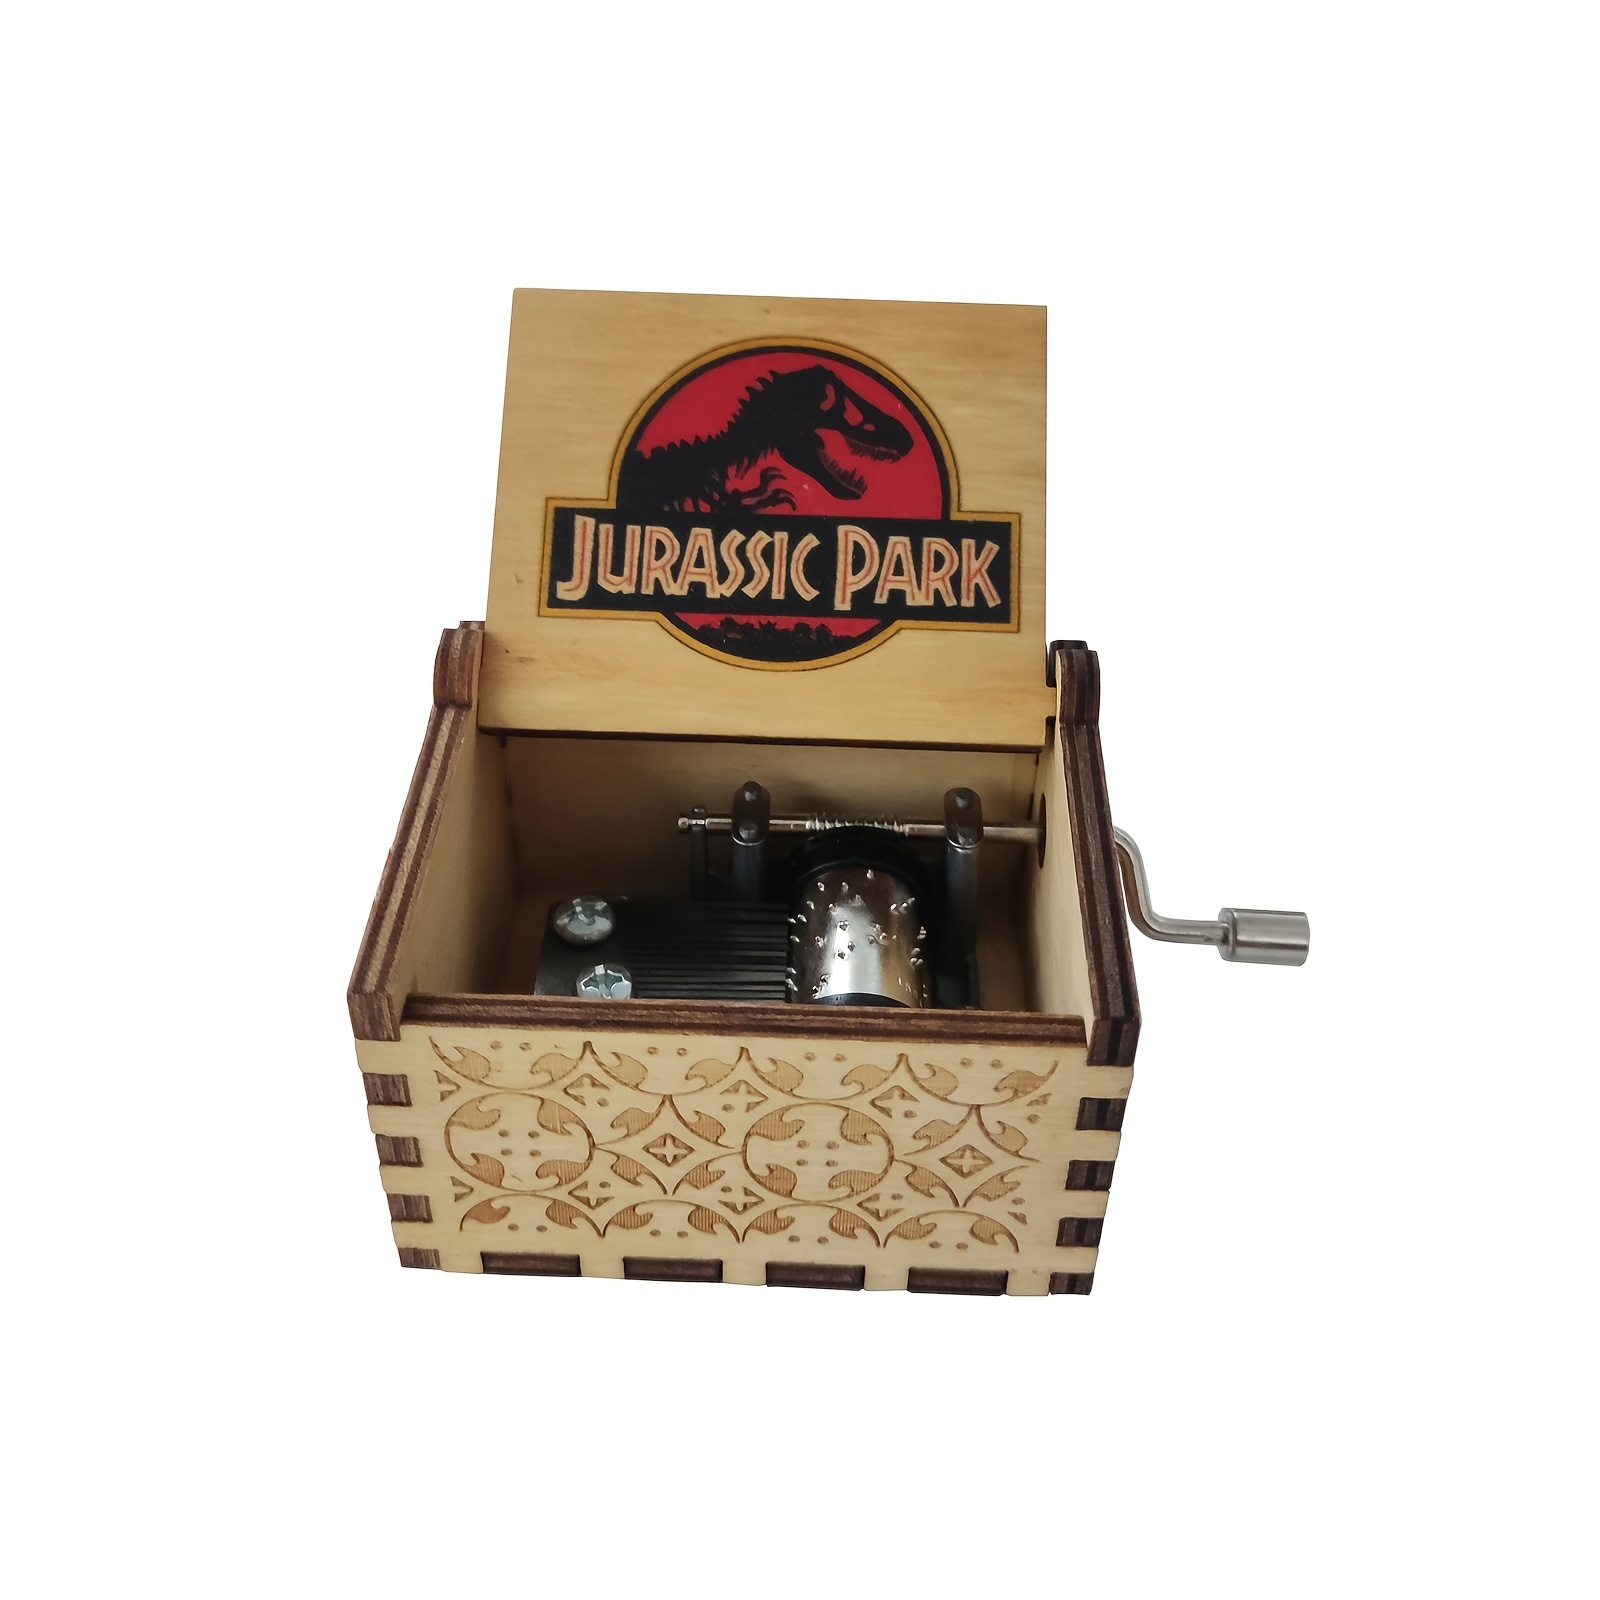 "Jurassic Park" Wooden MusicBox HandCranked Black Classic Handmade Gifts Kid Toy